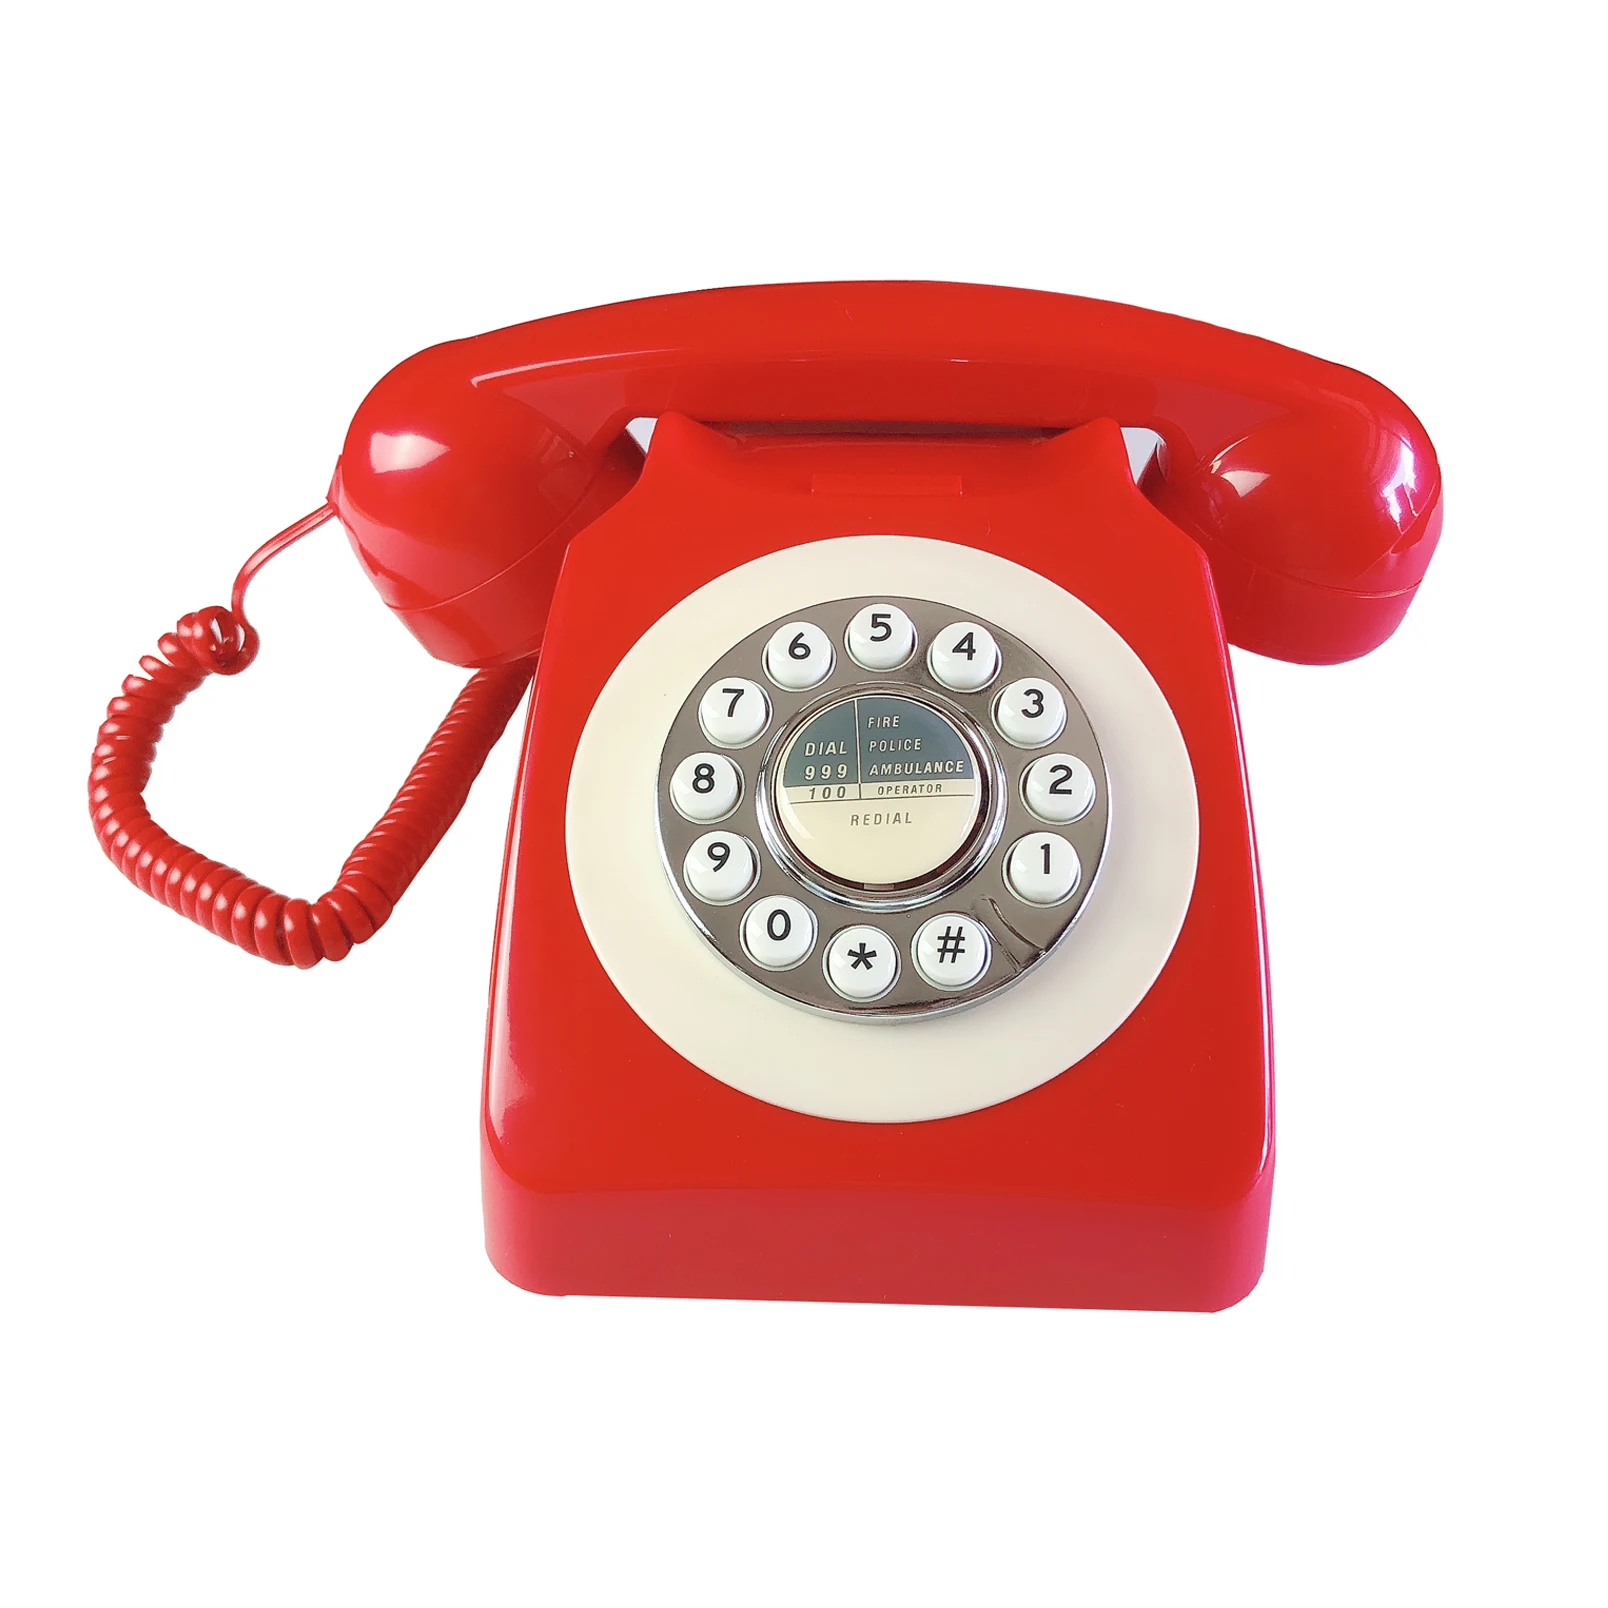 Accessories Red Retro Phone Corded 60's Classic Telephone/Landline Phone/Wired Antique Telephone for Home/Office/Hotel